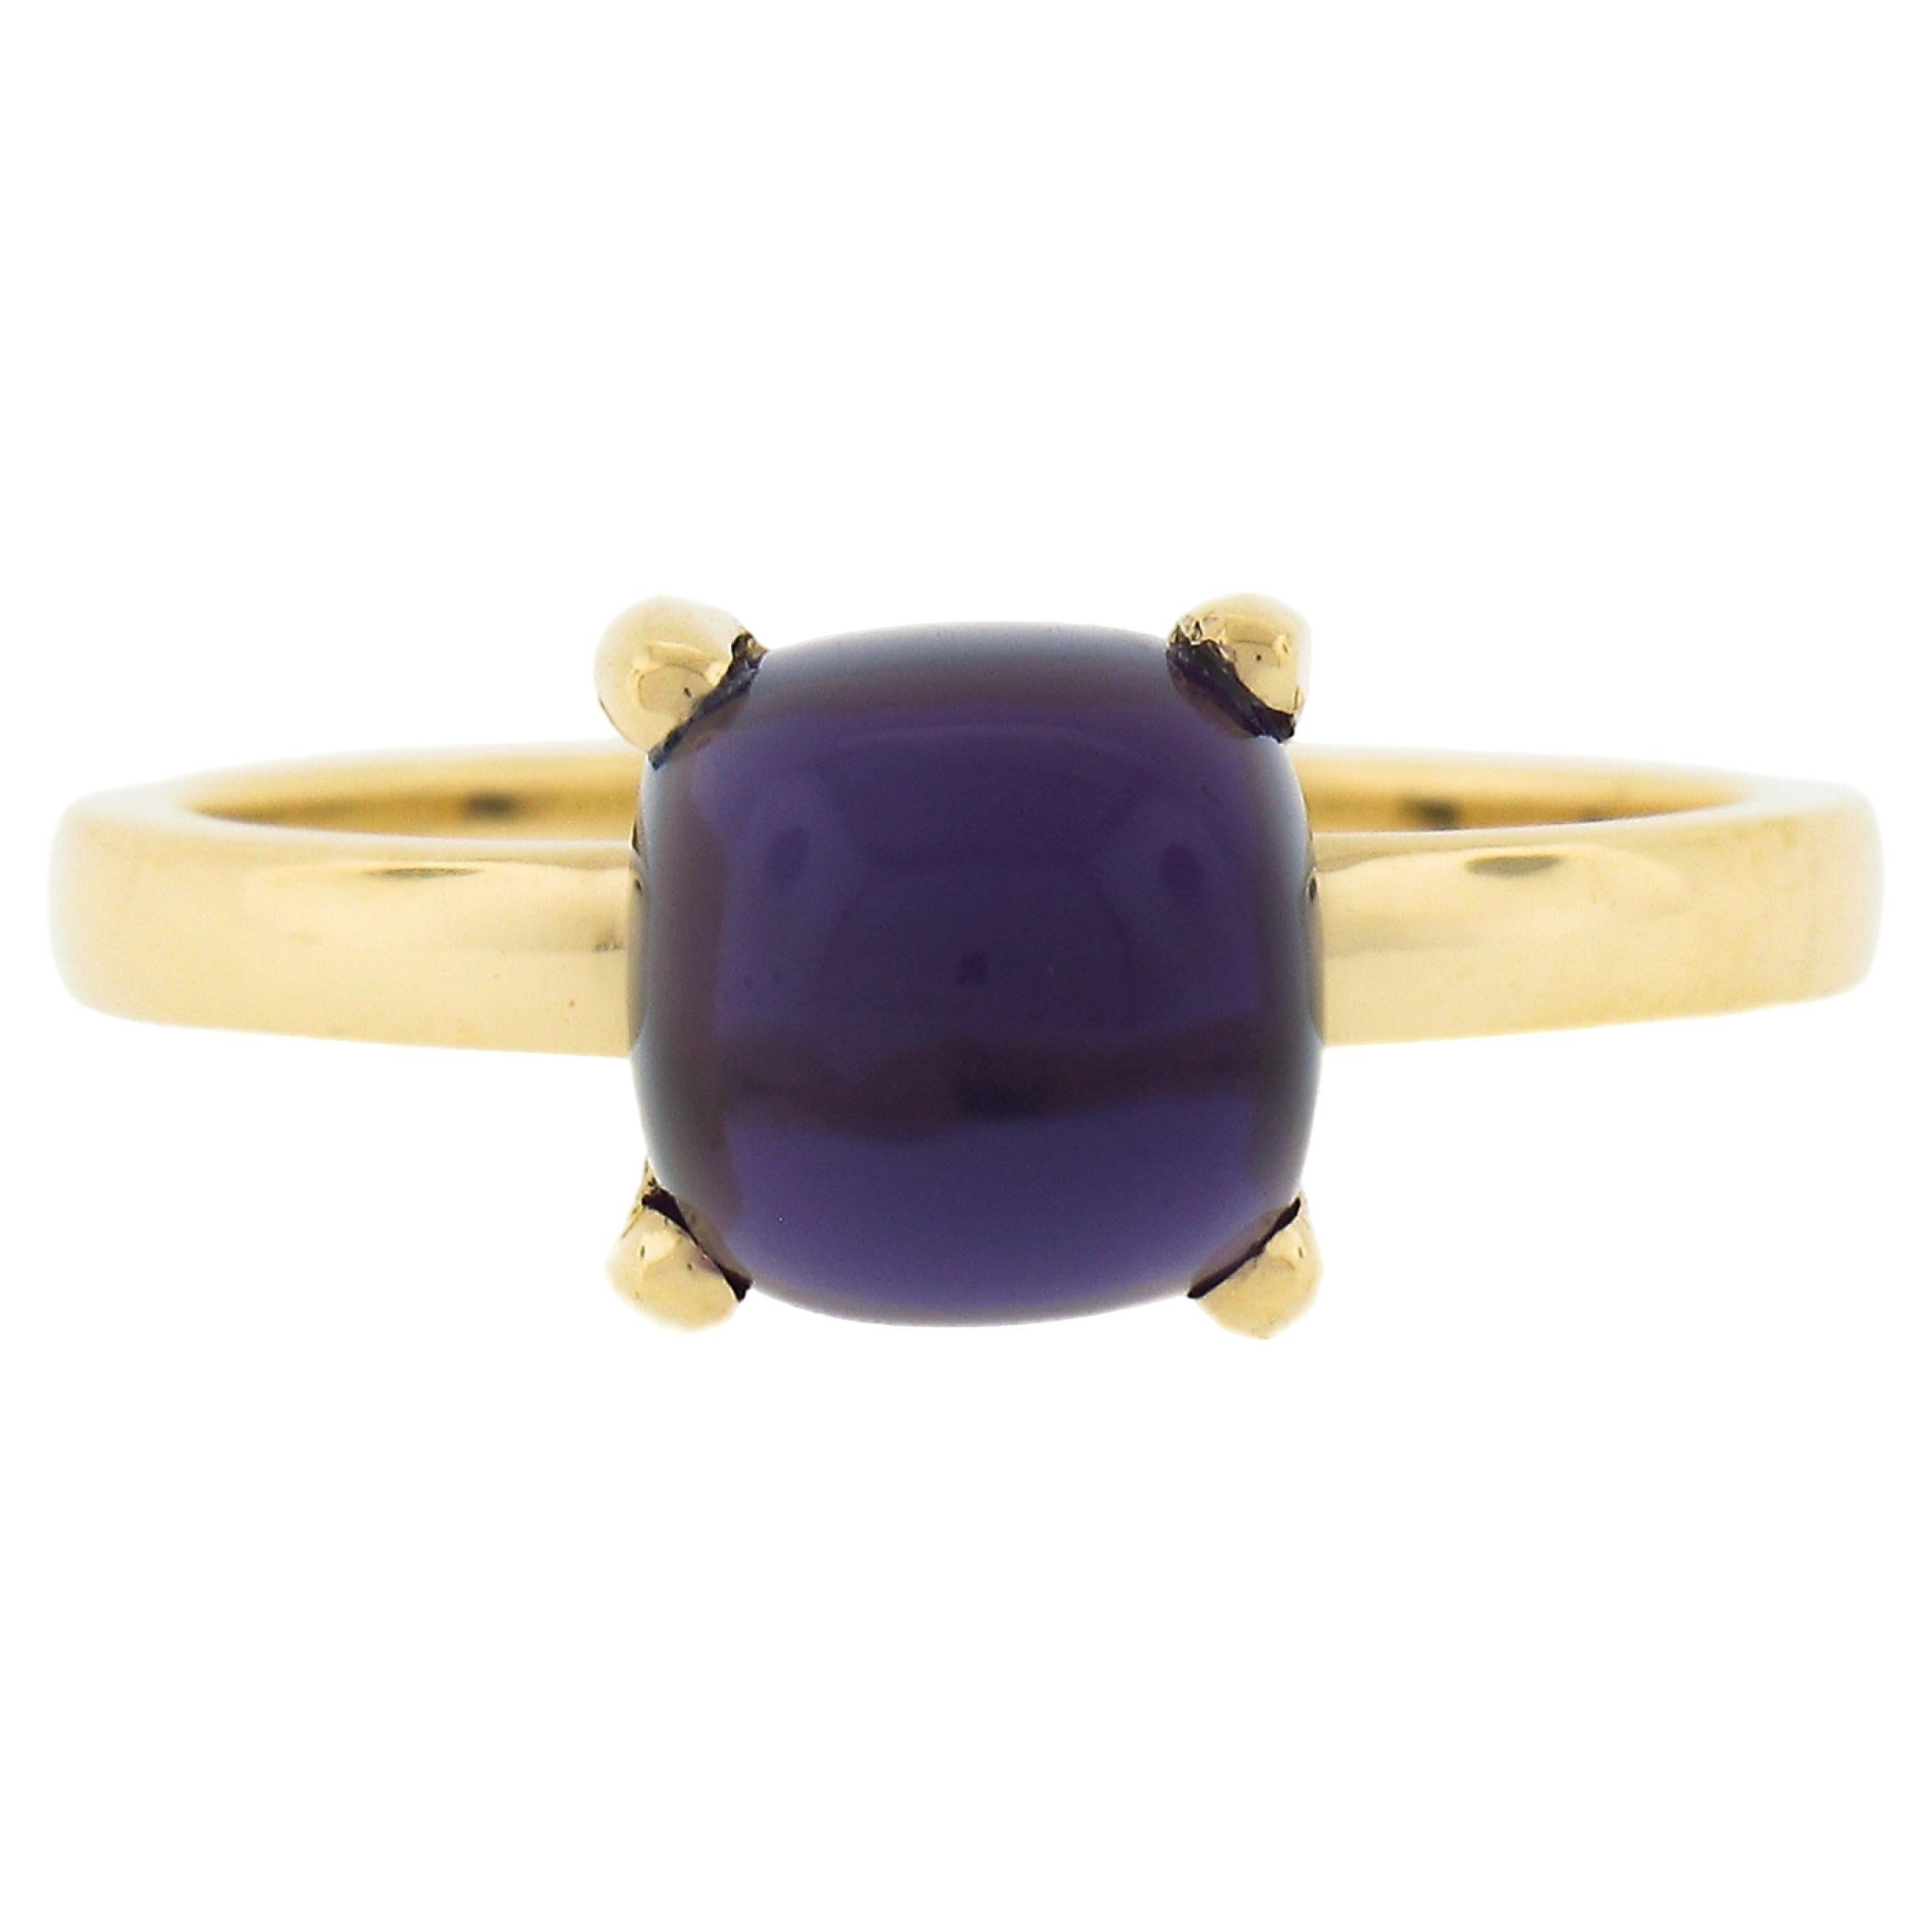 Tiffany & Co. 18k Gold Sugarloaf Cabochon Cut Amethyst Solitaire Cocktail Ring